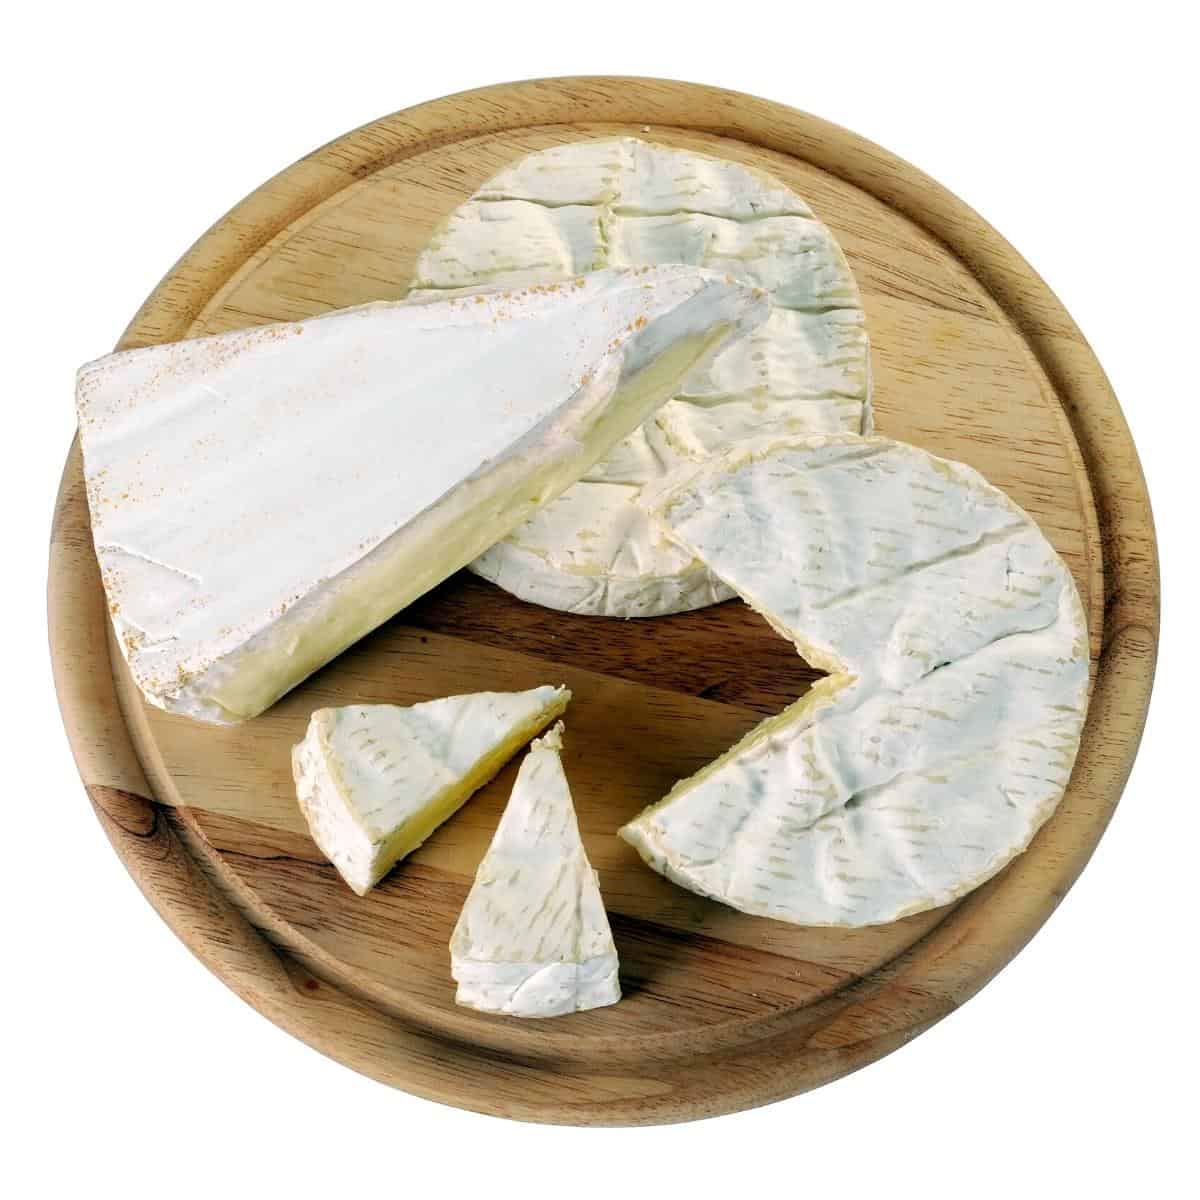 Camembert and brie on the cheeseboard.